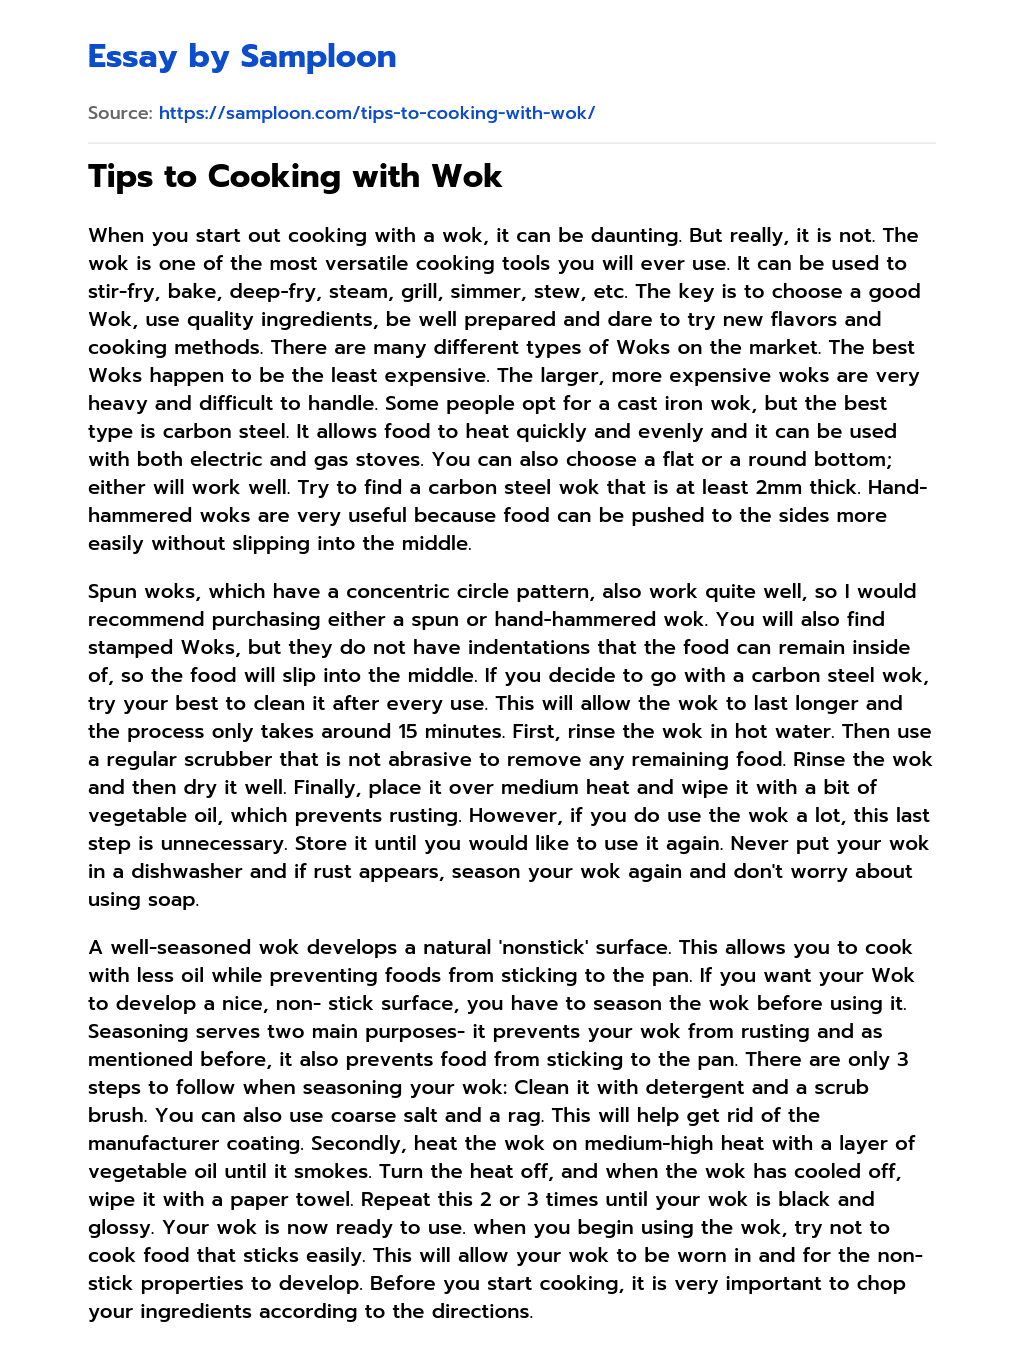 Tips to Cooking with Wok essay